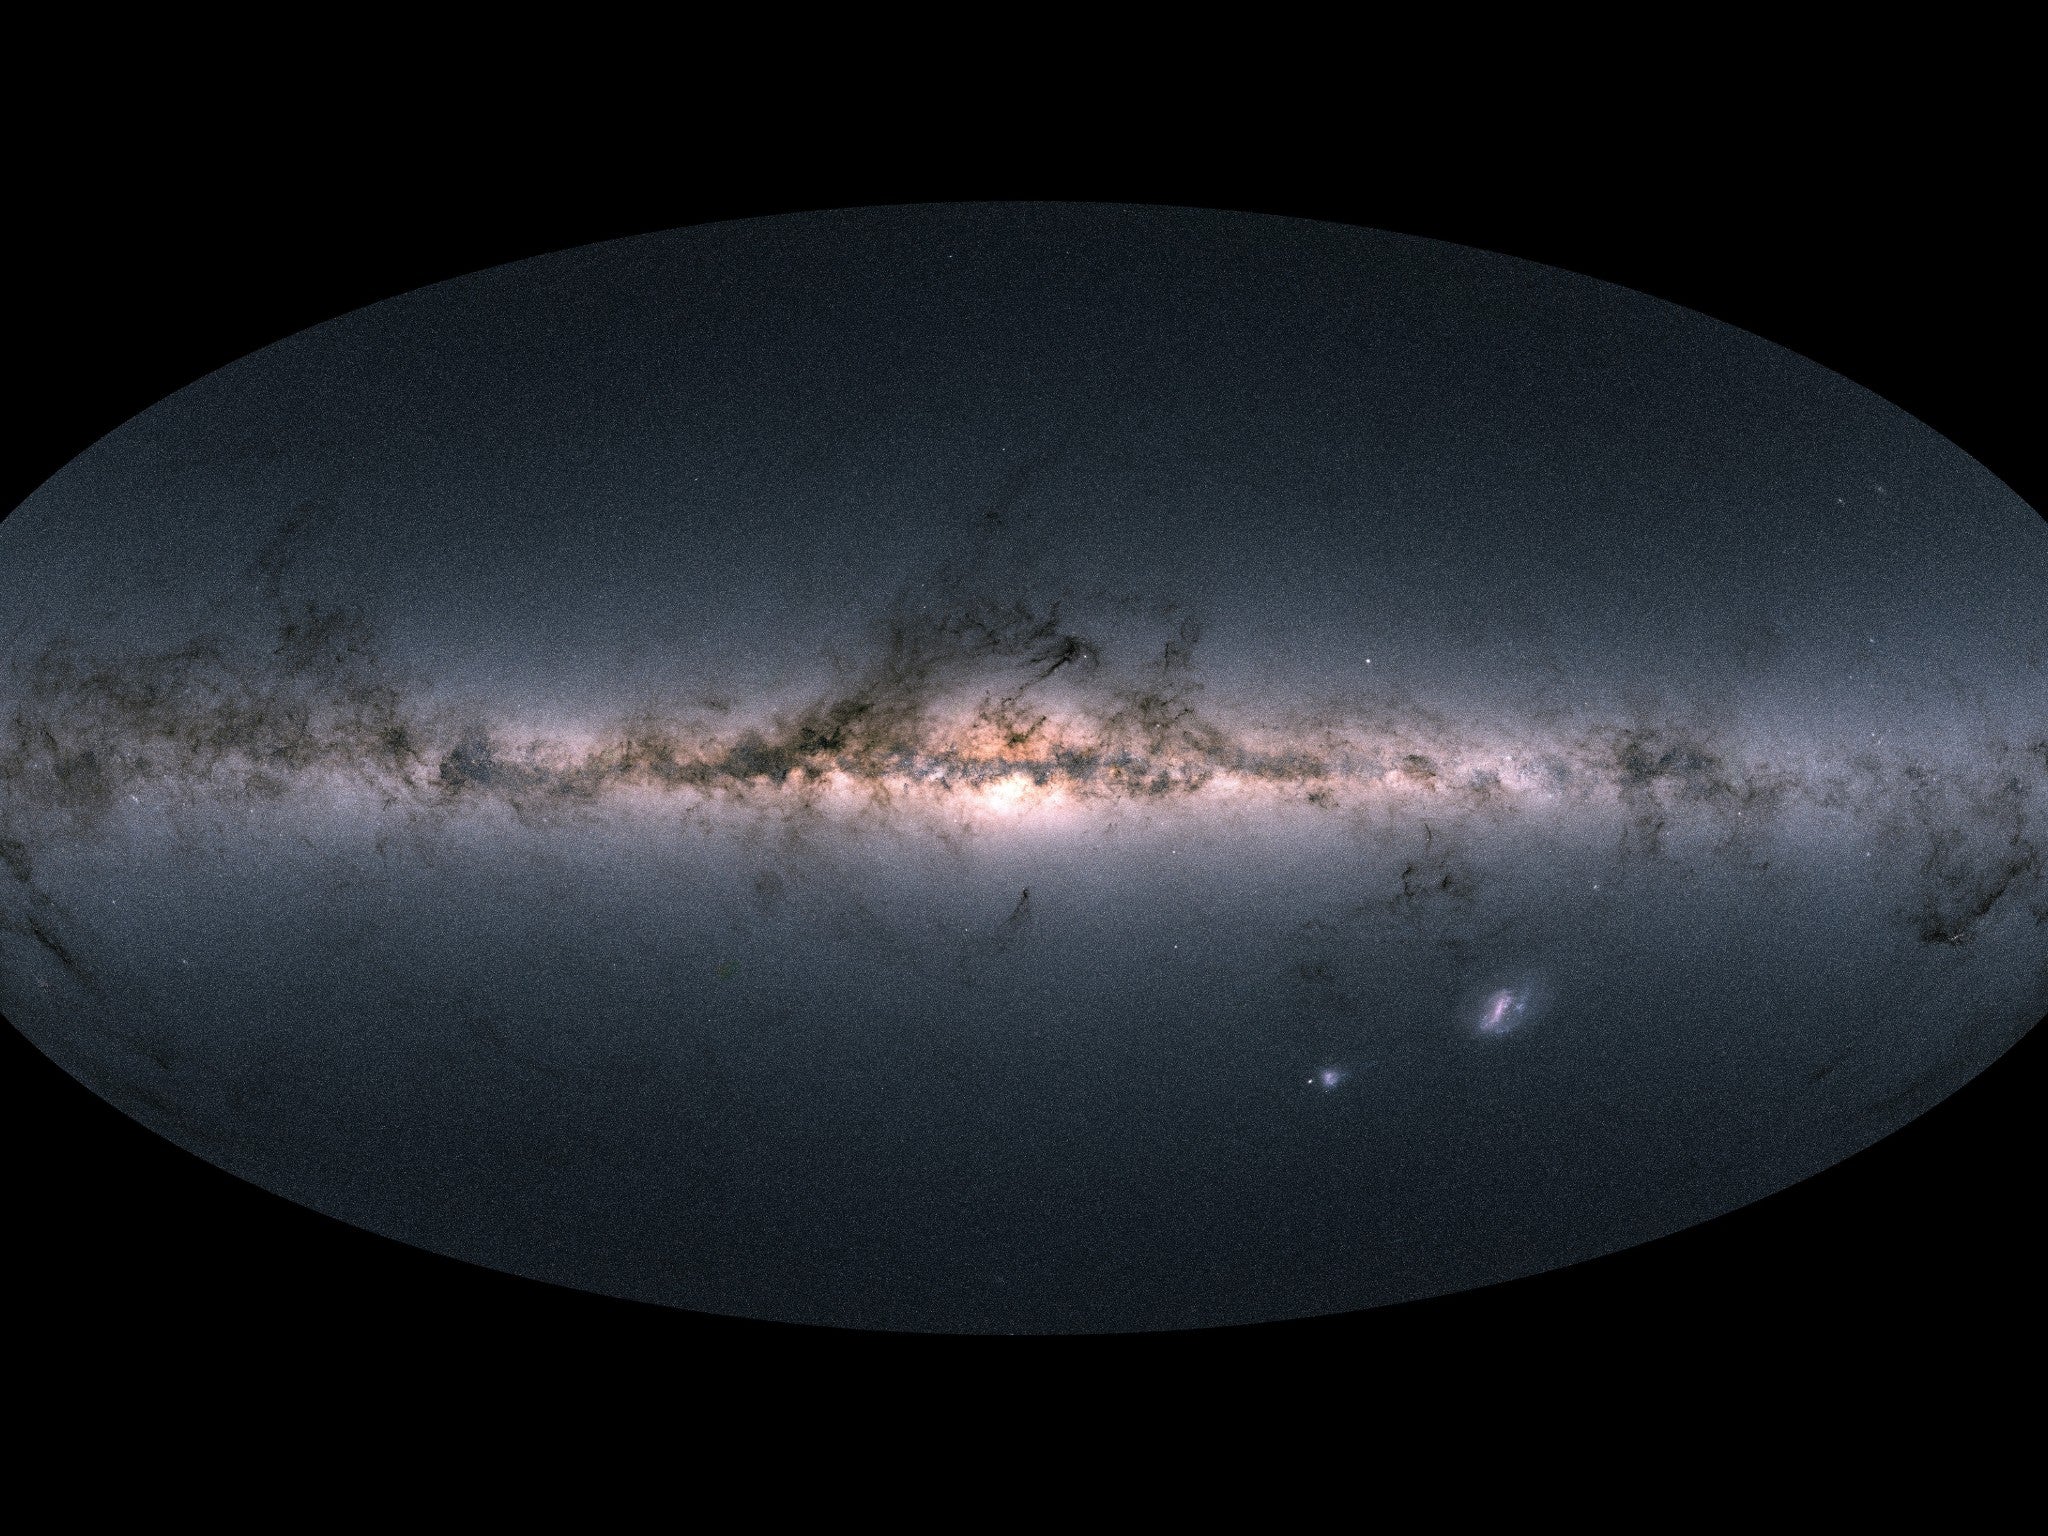 The Gaia spacecraft view of the whole sky: it’s measured the motion of two billion stars